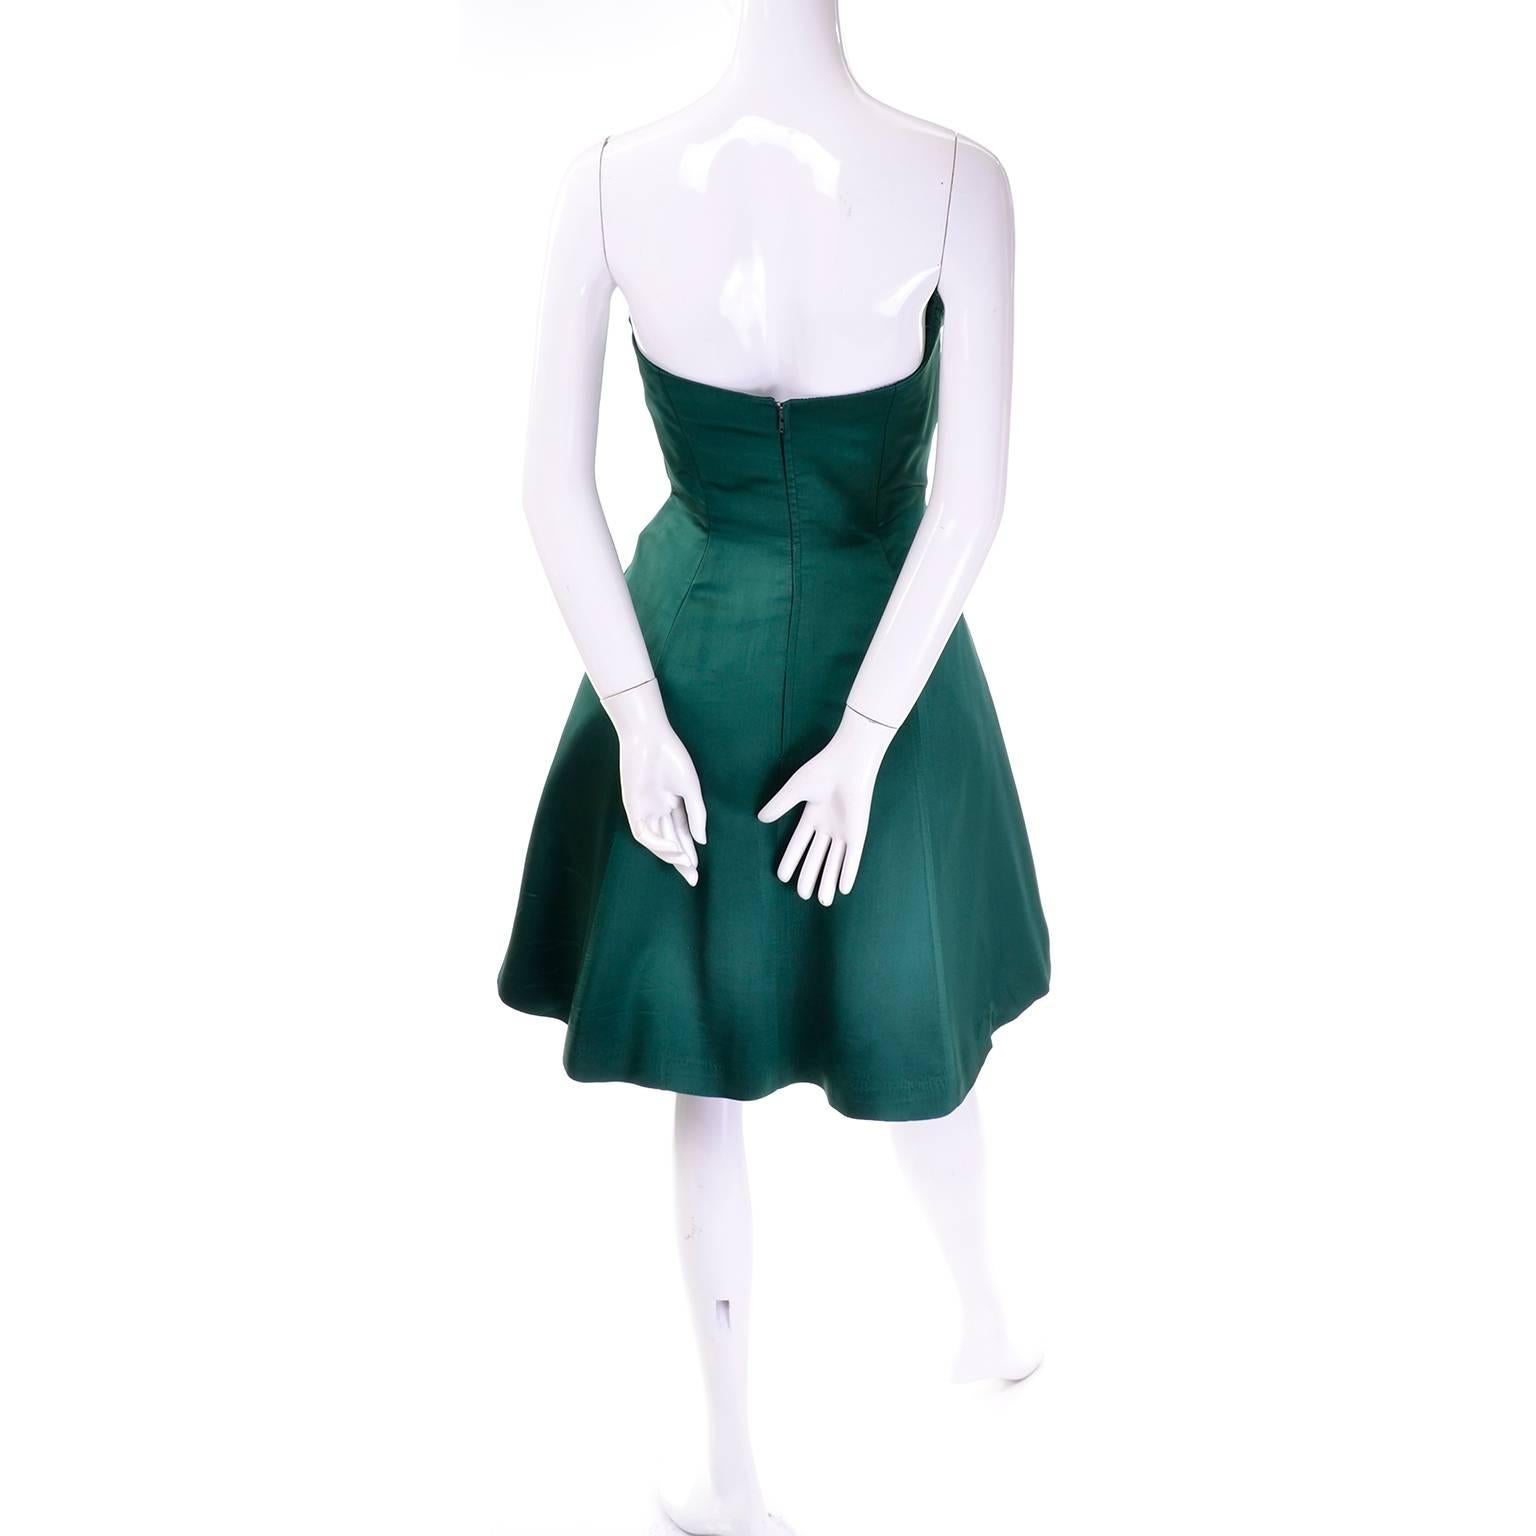 1980s Vicky Tiel Couture Bergdorf Goodman Green Sweetheart Bodice Evening Dress For Sale 1